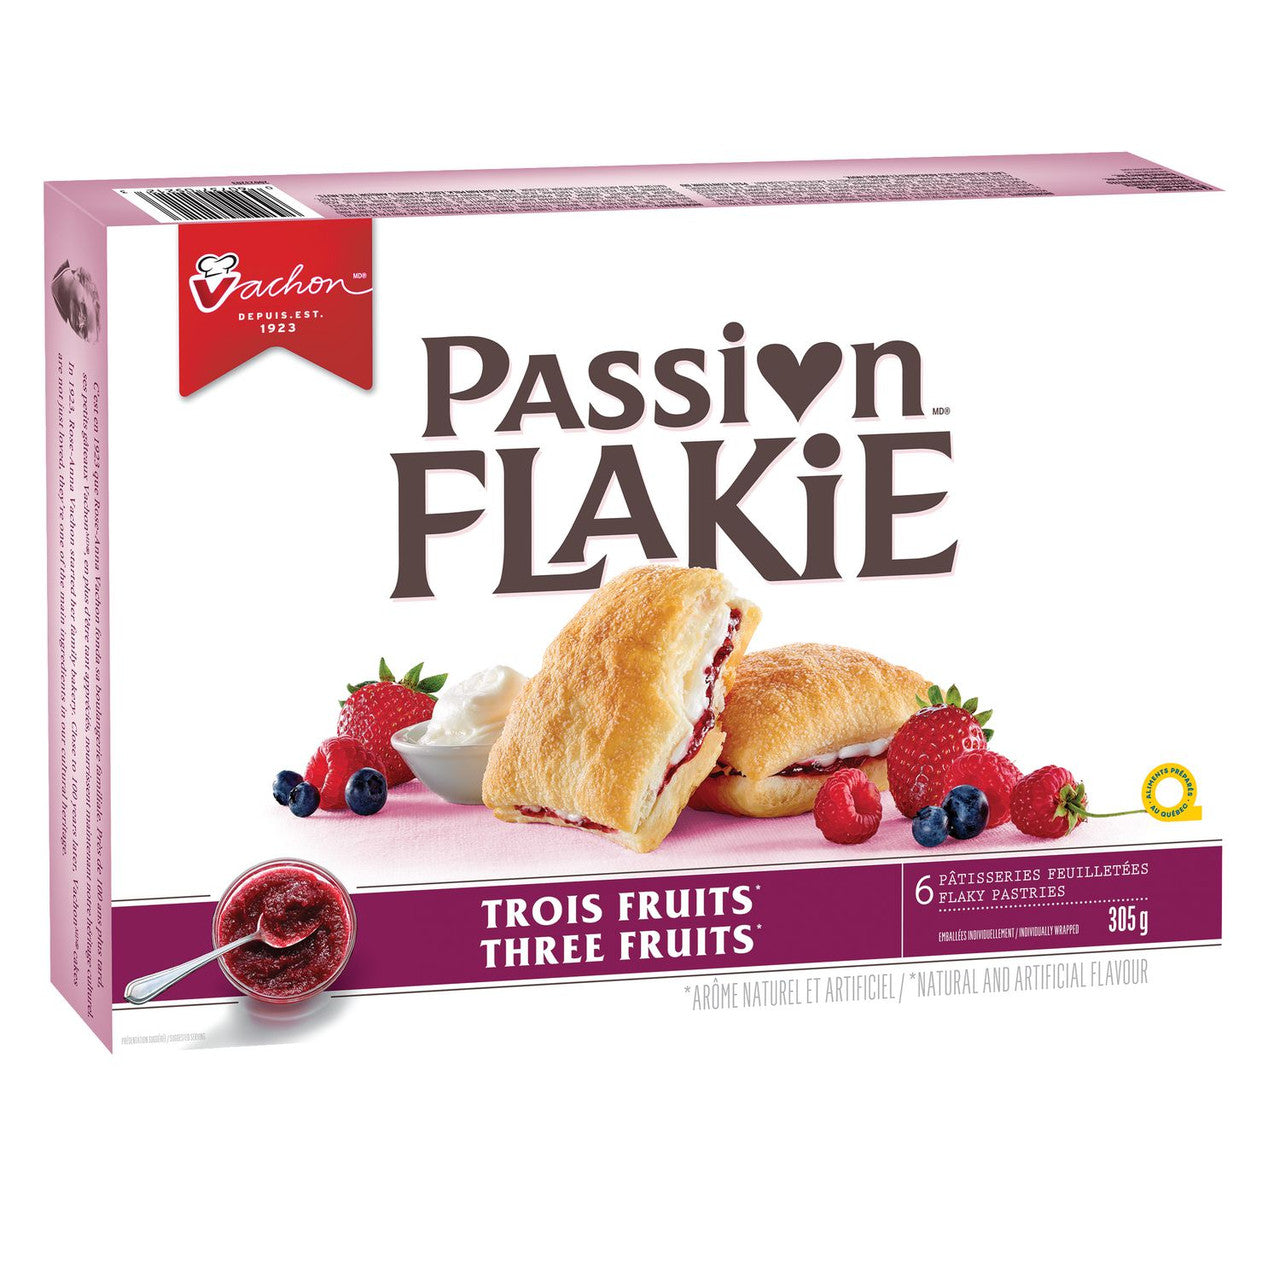 Vachon Passion Flakie Pastries Three Fruits 305g/10.8oz,  {Imported from Canada}